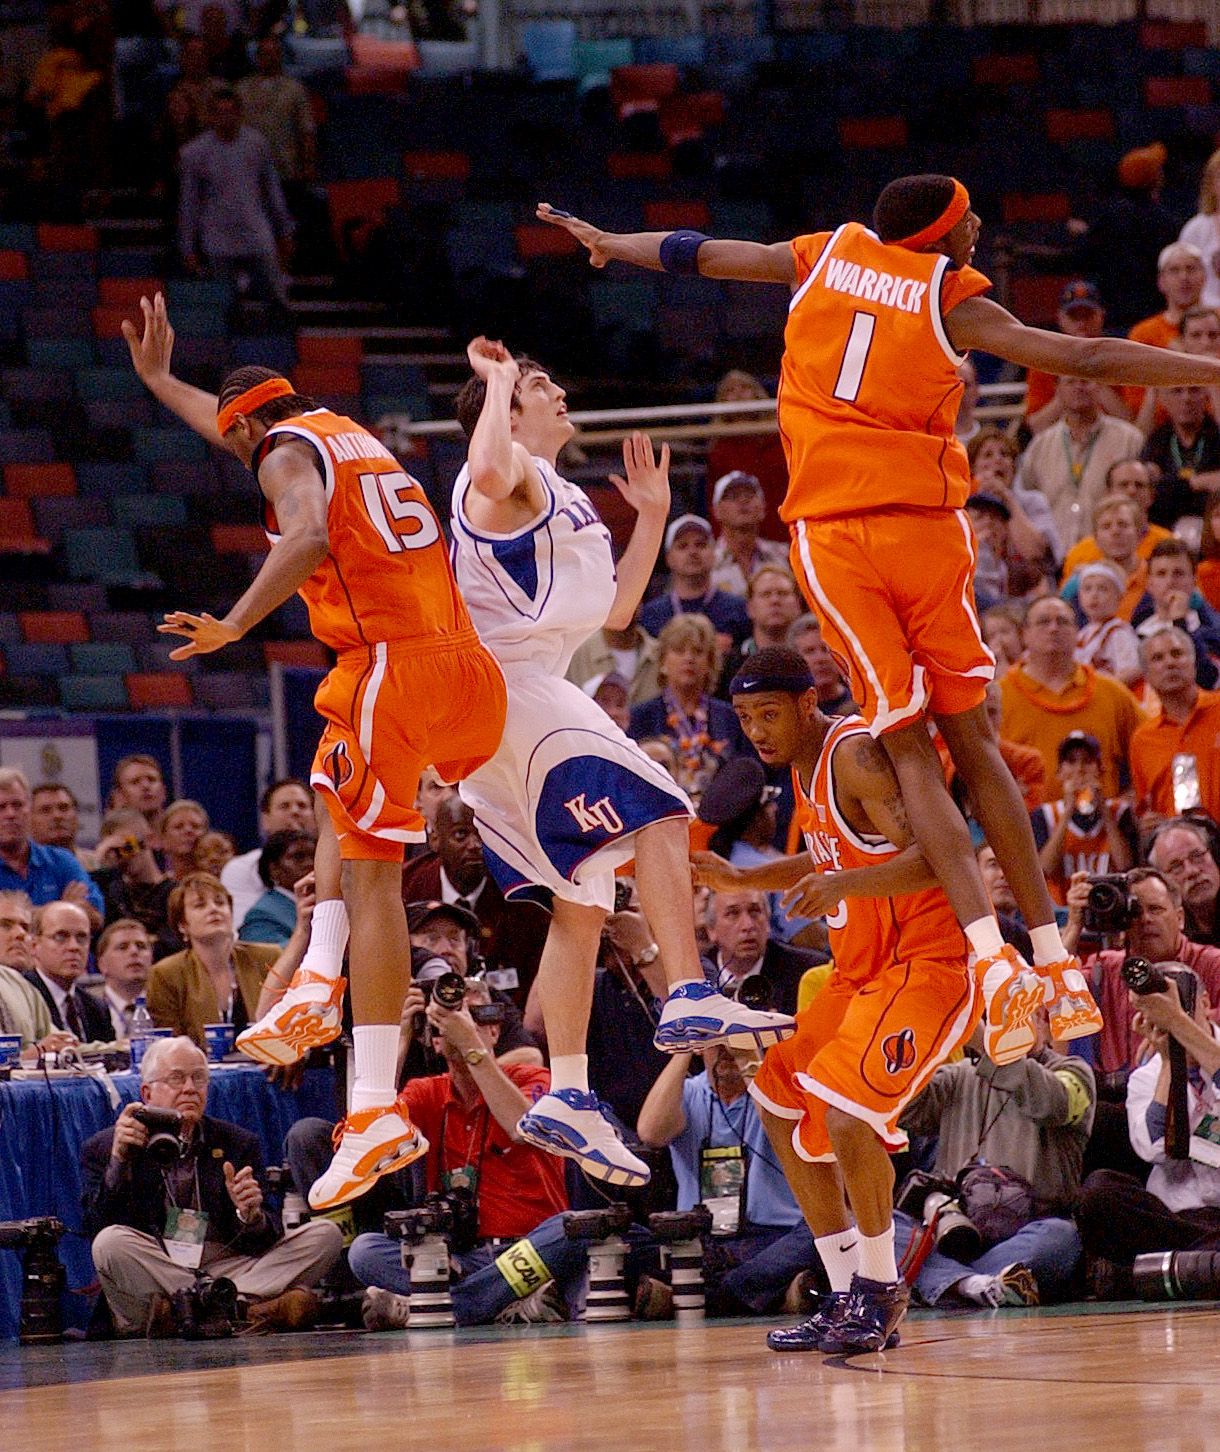 Kansas' Kirk Hinrich puts up a shot and is fouled by Syracuse's Kueth Duany  in the second half of the championship game at the Final Four Monday, April  7, 2003, in New